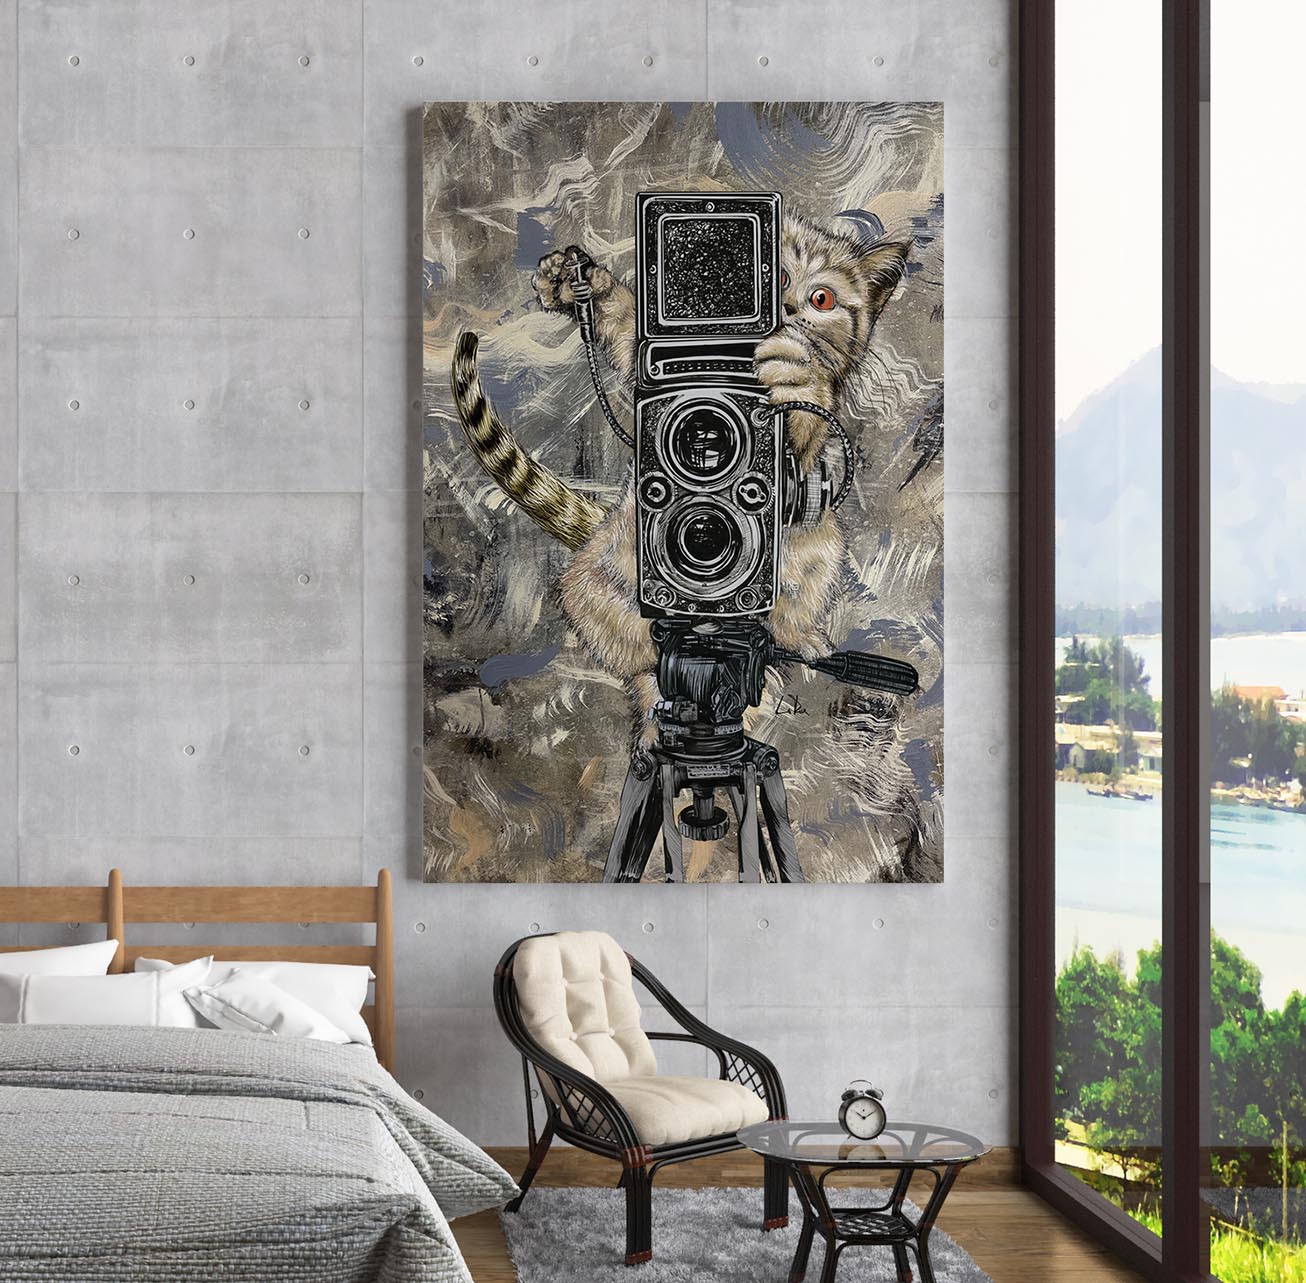 Catographer mixed media art by Doug LaRue on a bedroom wall